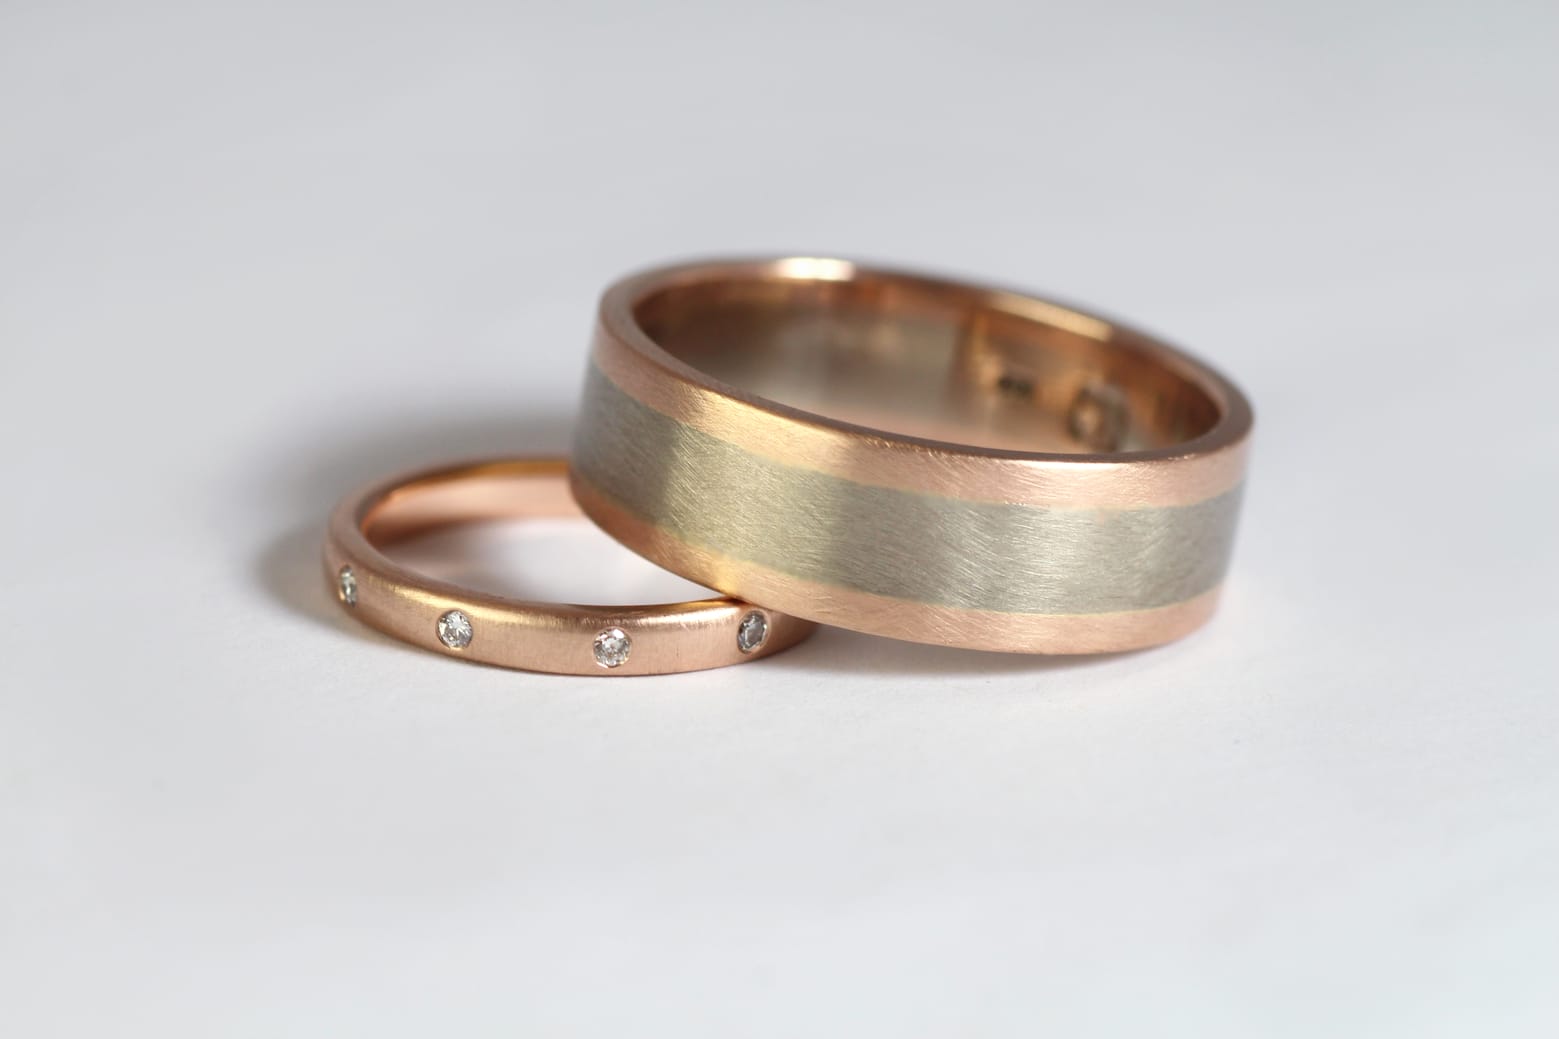 18ct Fairtrade gold his and hers wedding bands